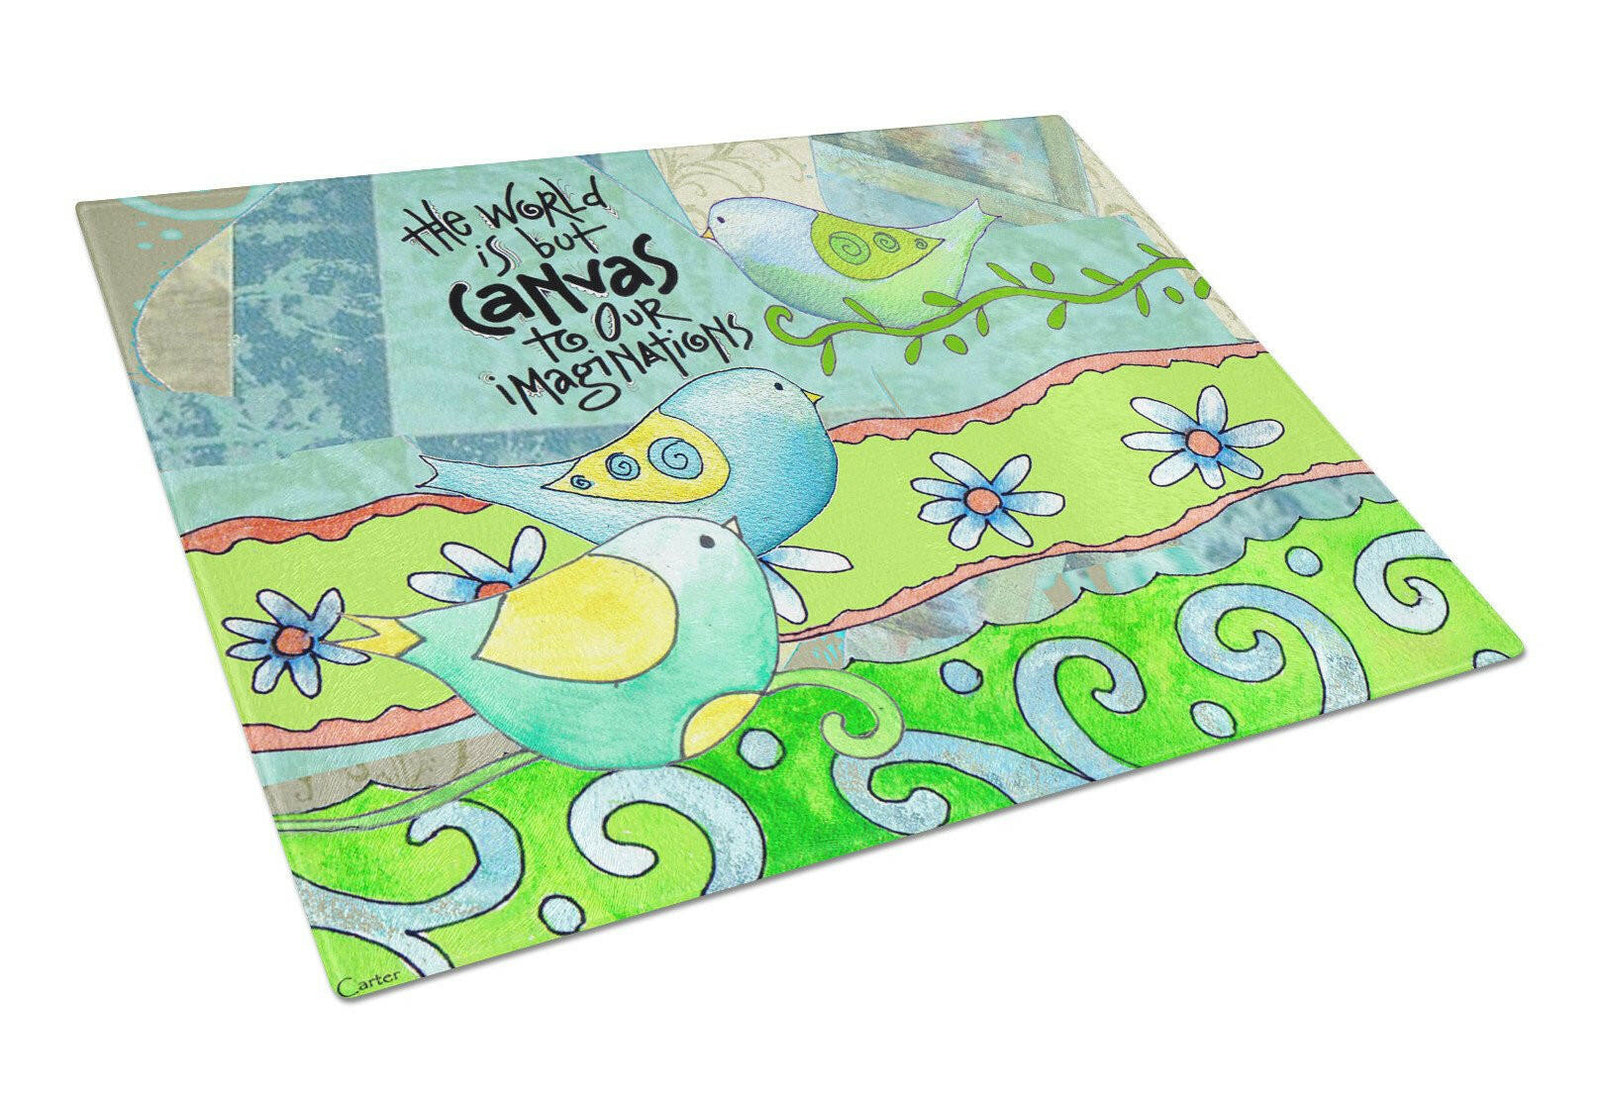 The World is but a Canvas to our Imagination Glass Cutting Board Large PJC1098LCB by Caroline's Treasures